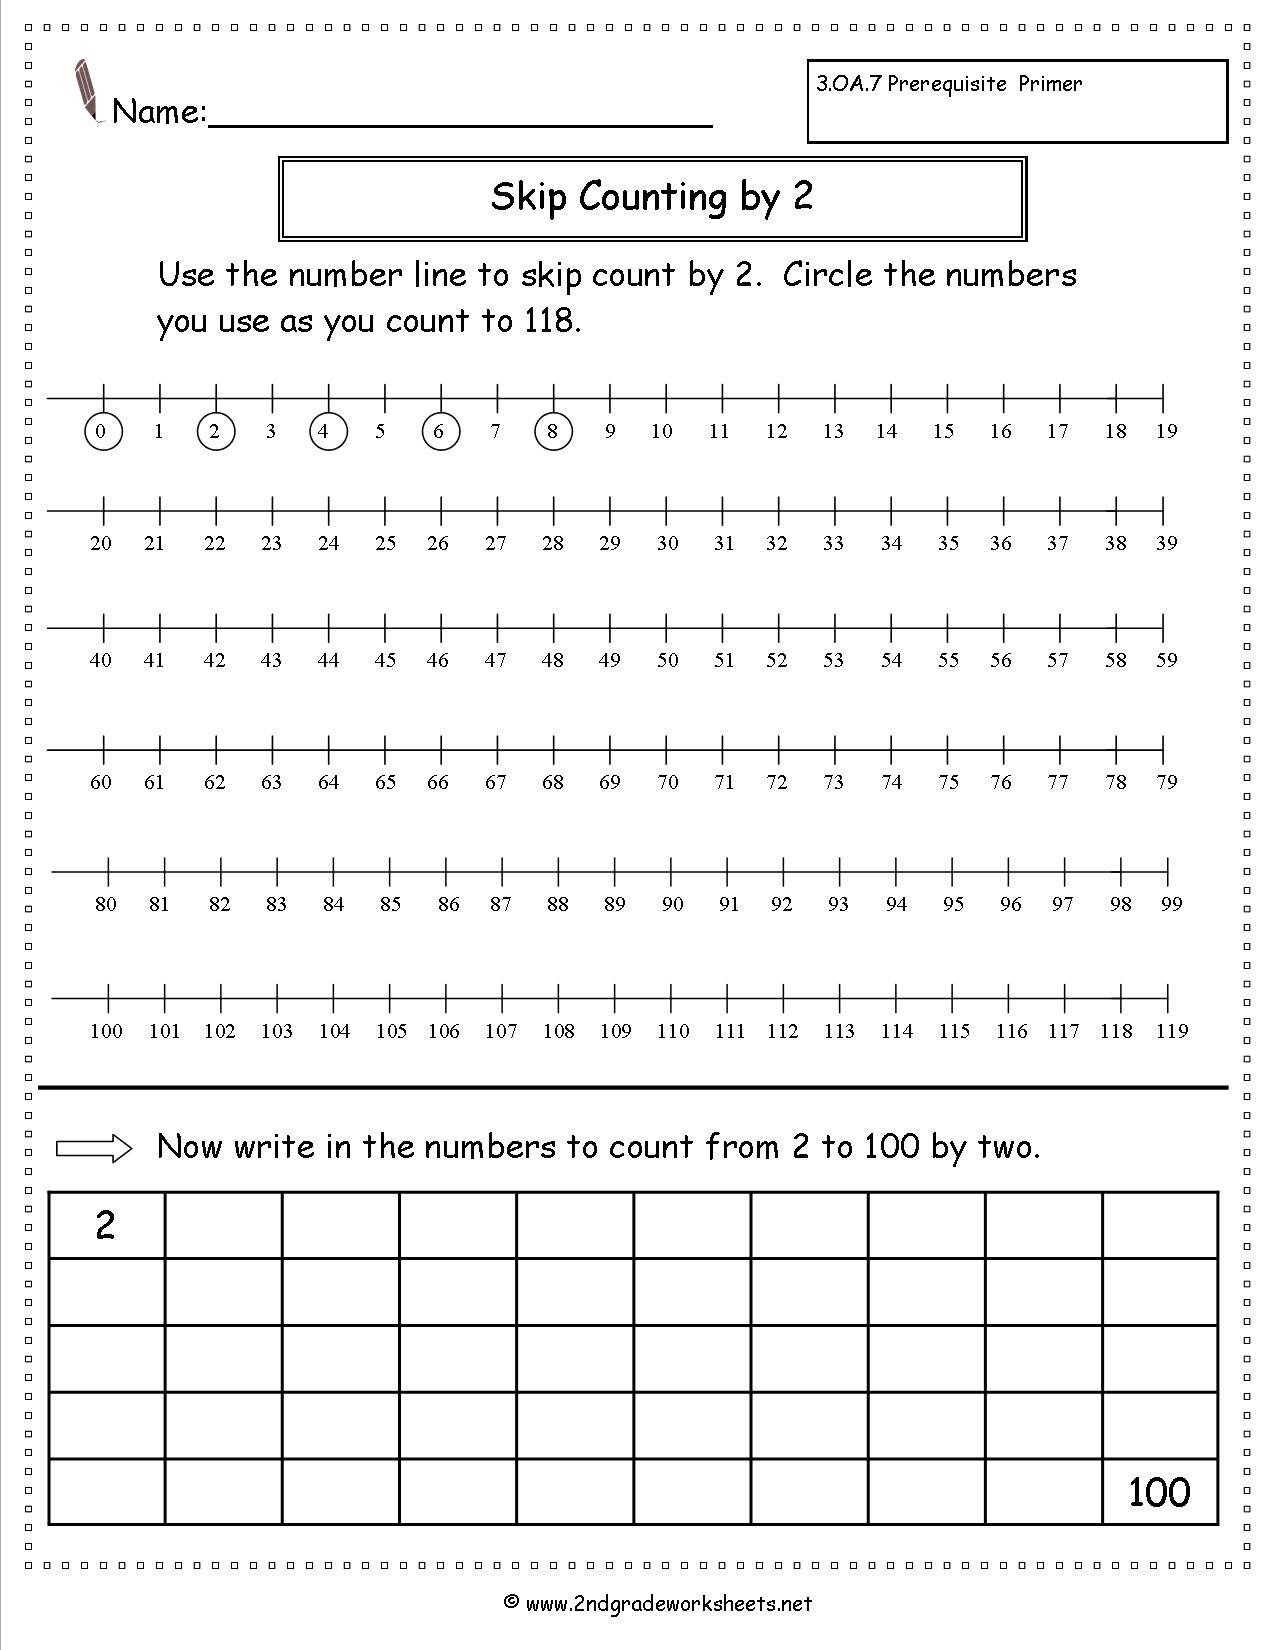 Free Math Worksheets Second Grade 2 Skip Counting Skip Counting by 8